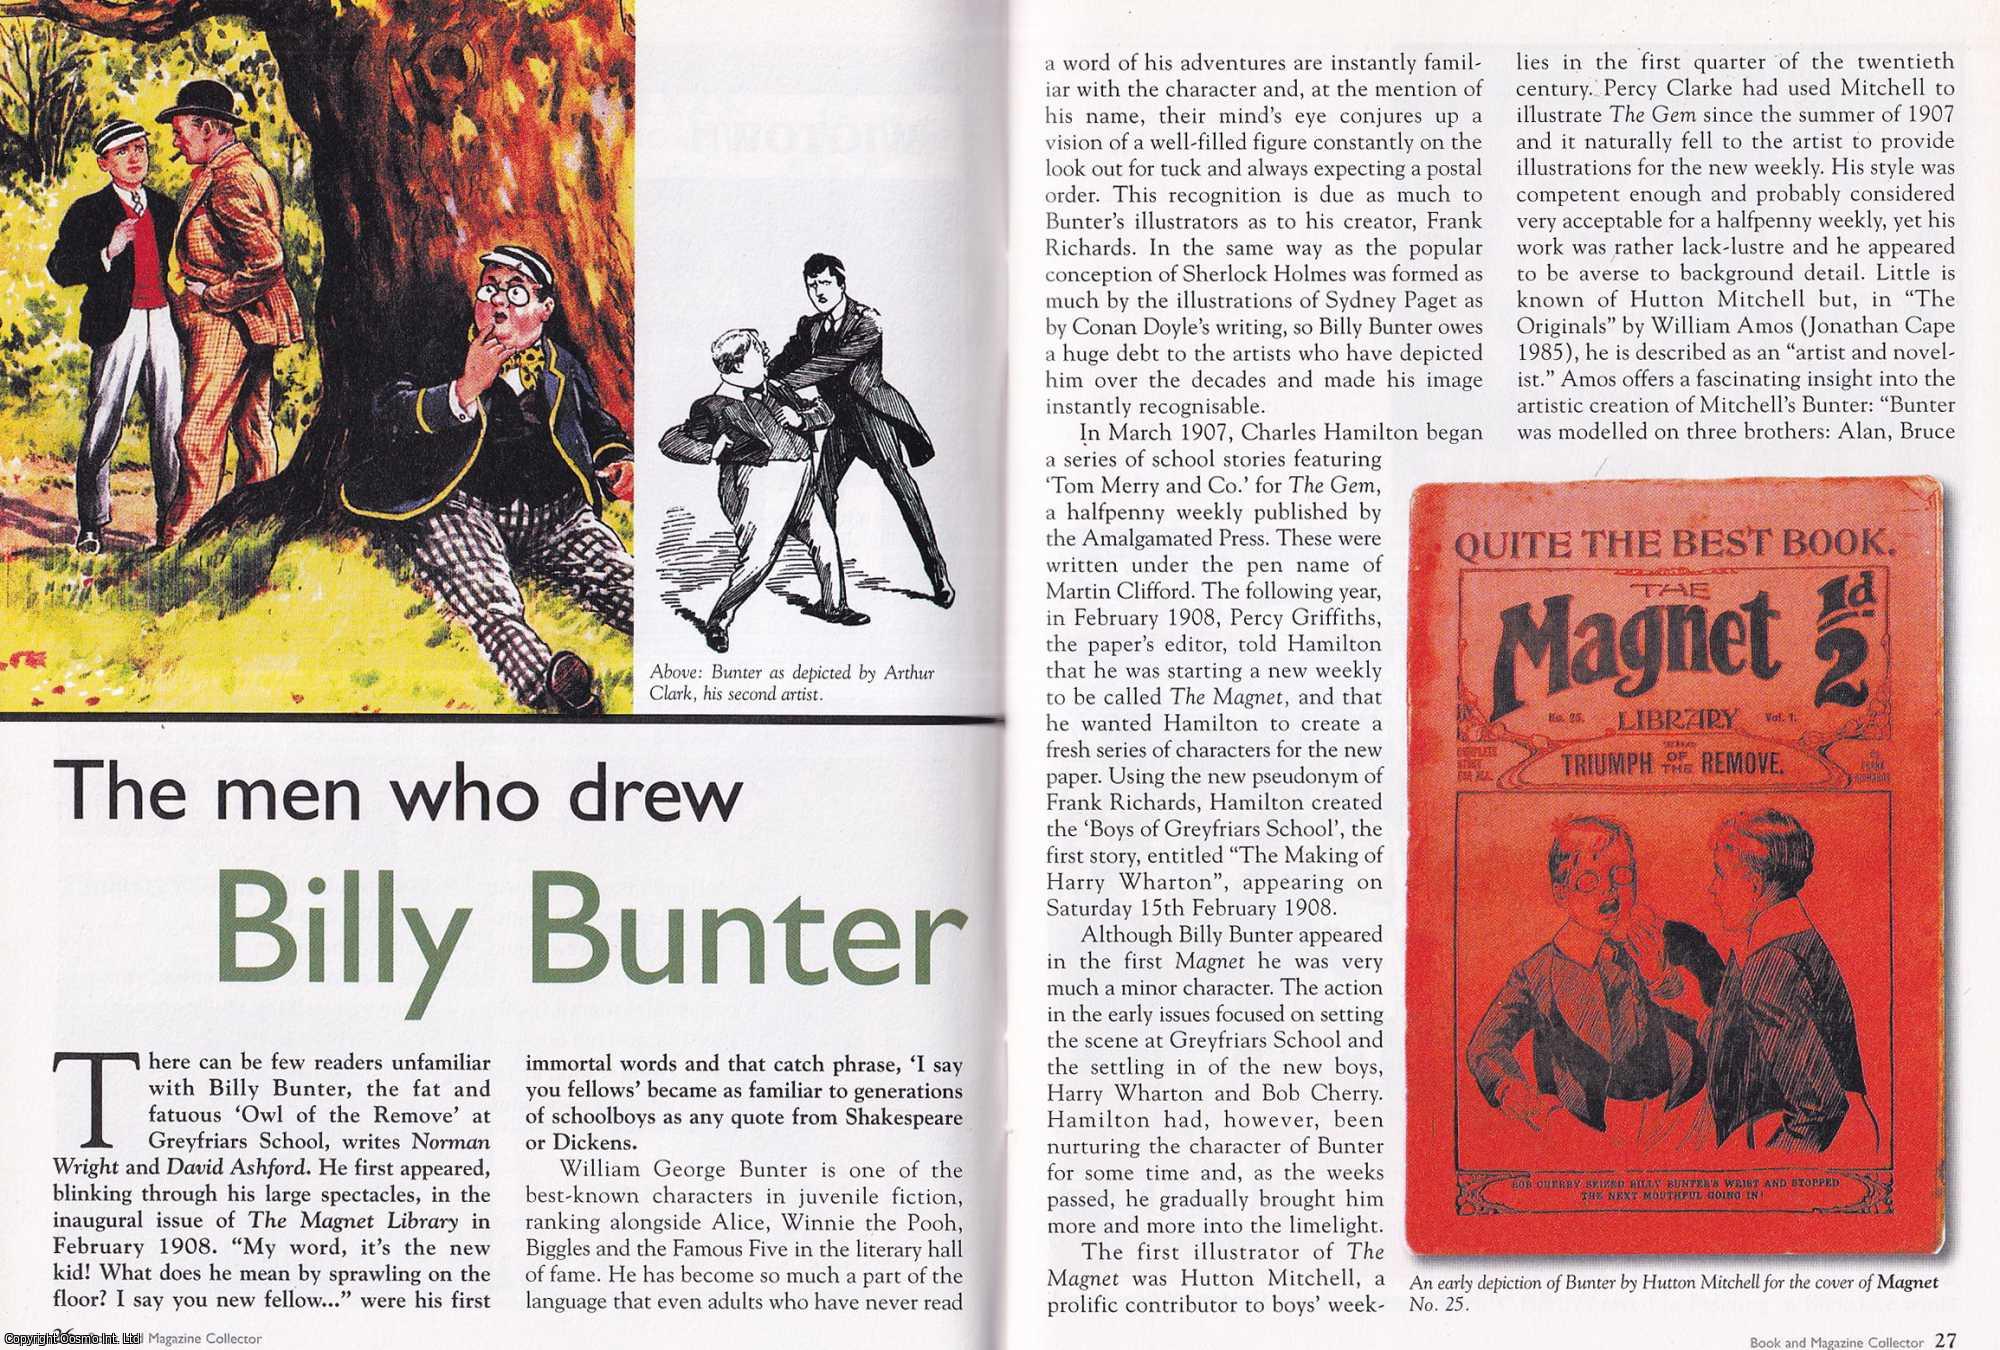 --- - The Men who Drew Billy Bunter. This is an original article separated from an issue of The Book & Magazine Collector publication.